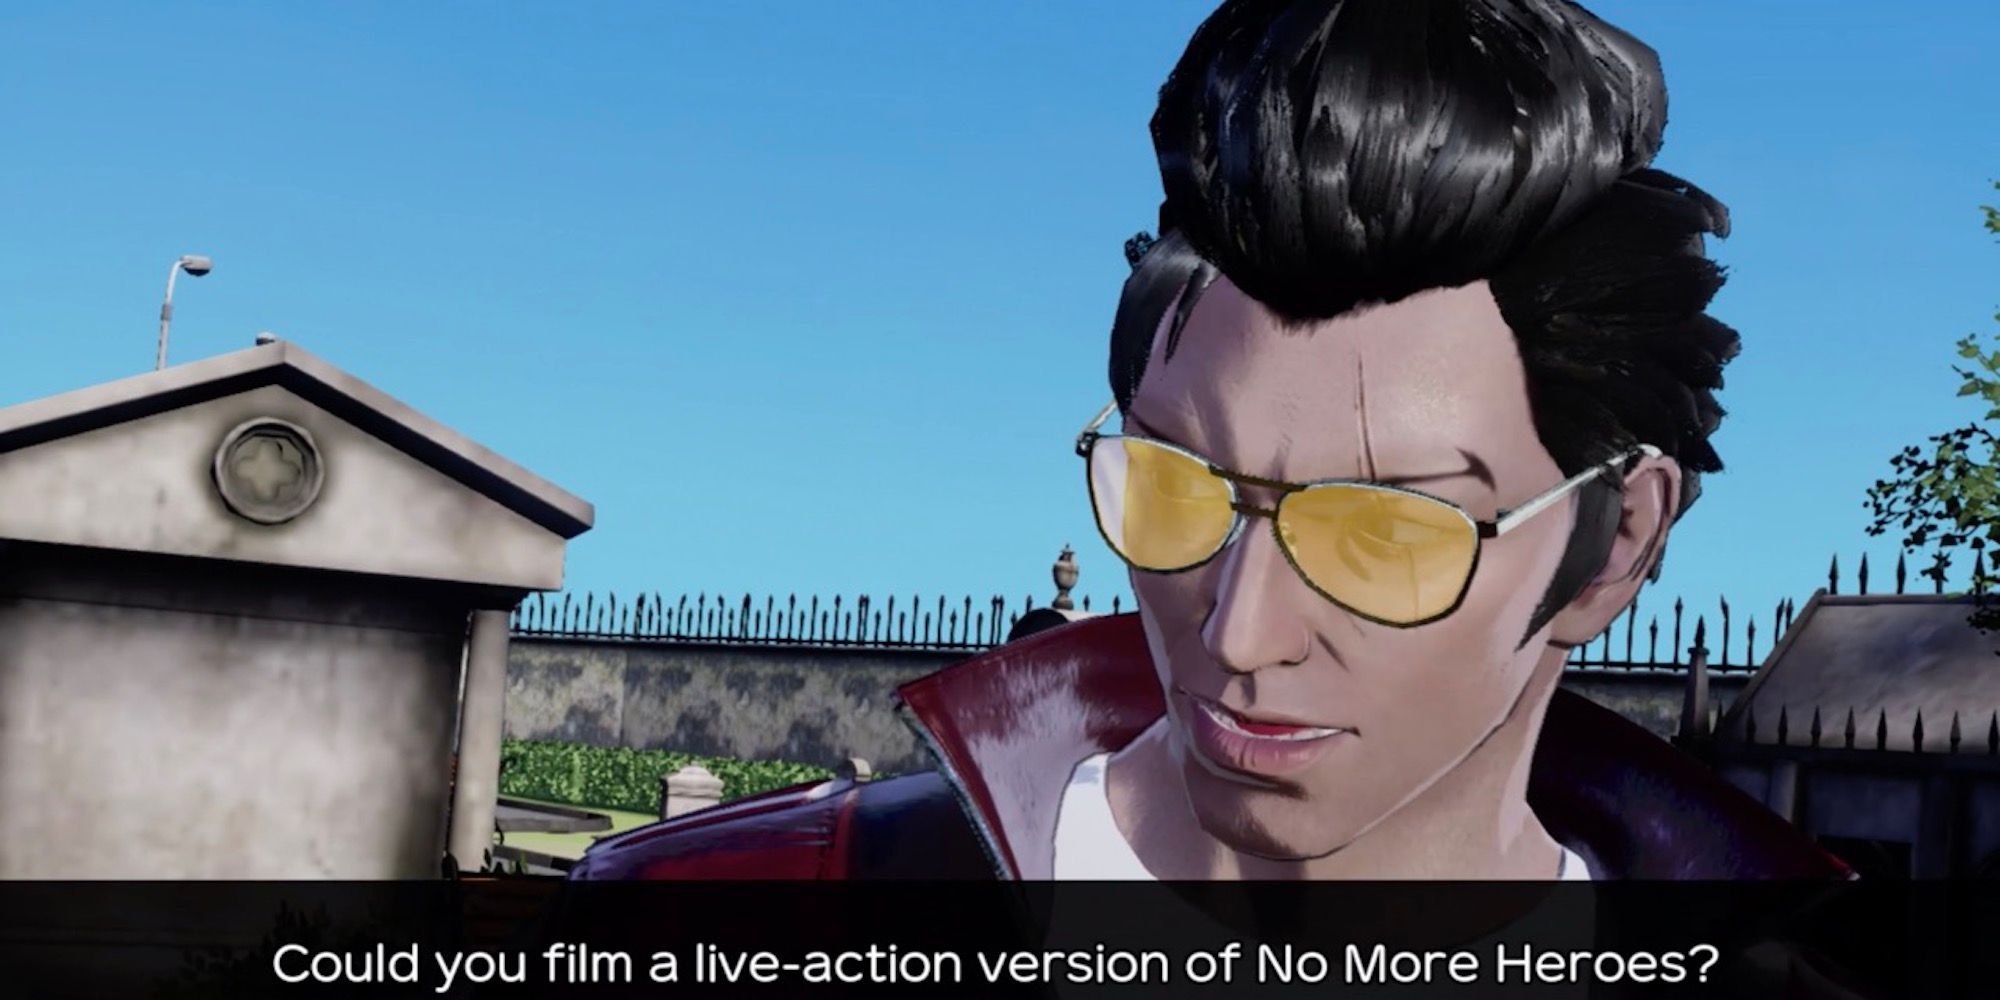 Travis from No More Heroes III